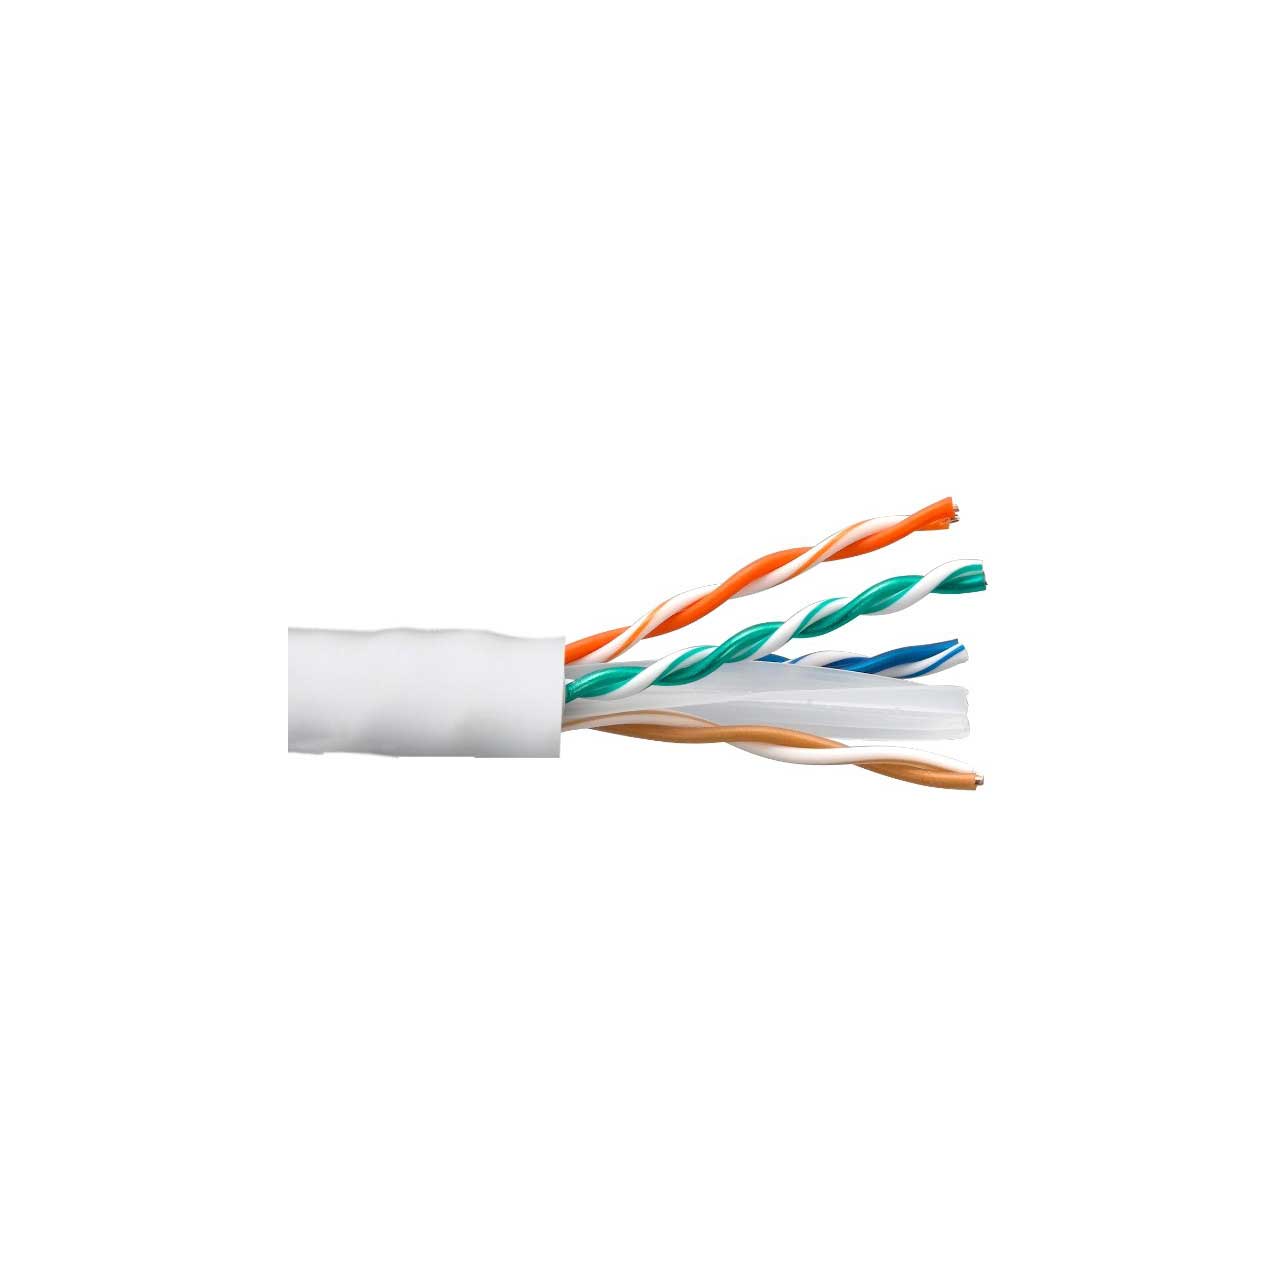 Connectronics 10X8-218TH-CMR 550MHz CAT6 Ethernet Cable - 1000 Foot - White CTX-10X8218THCMR